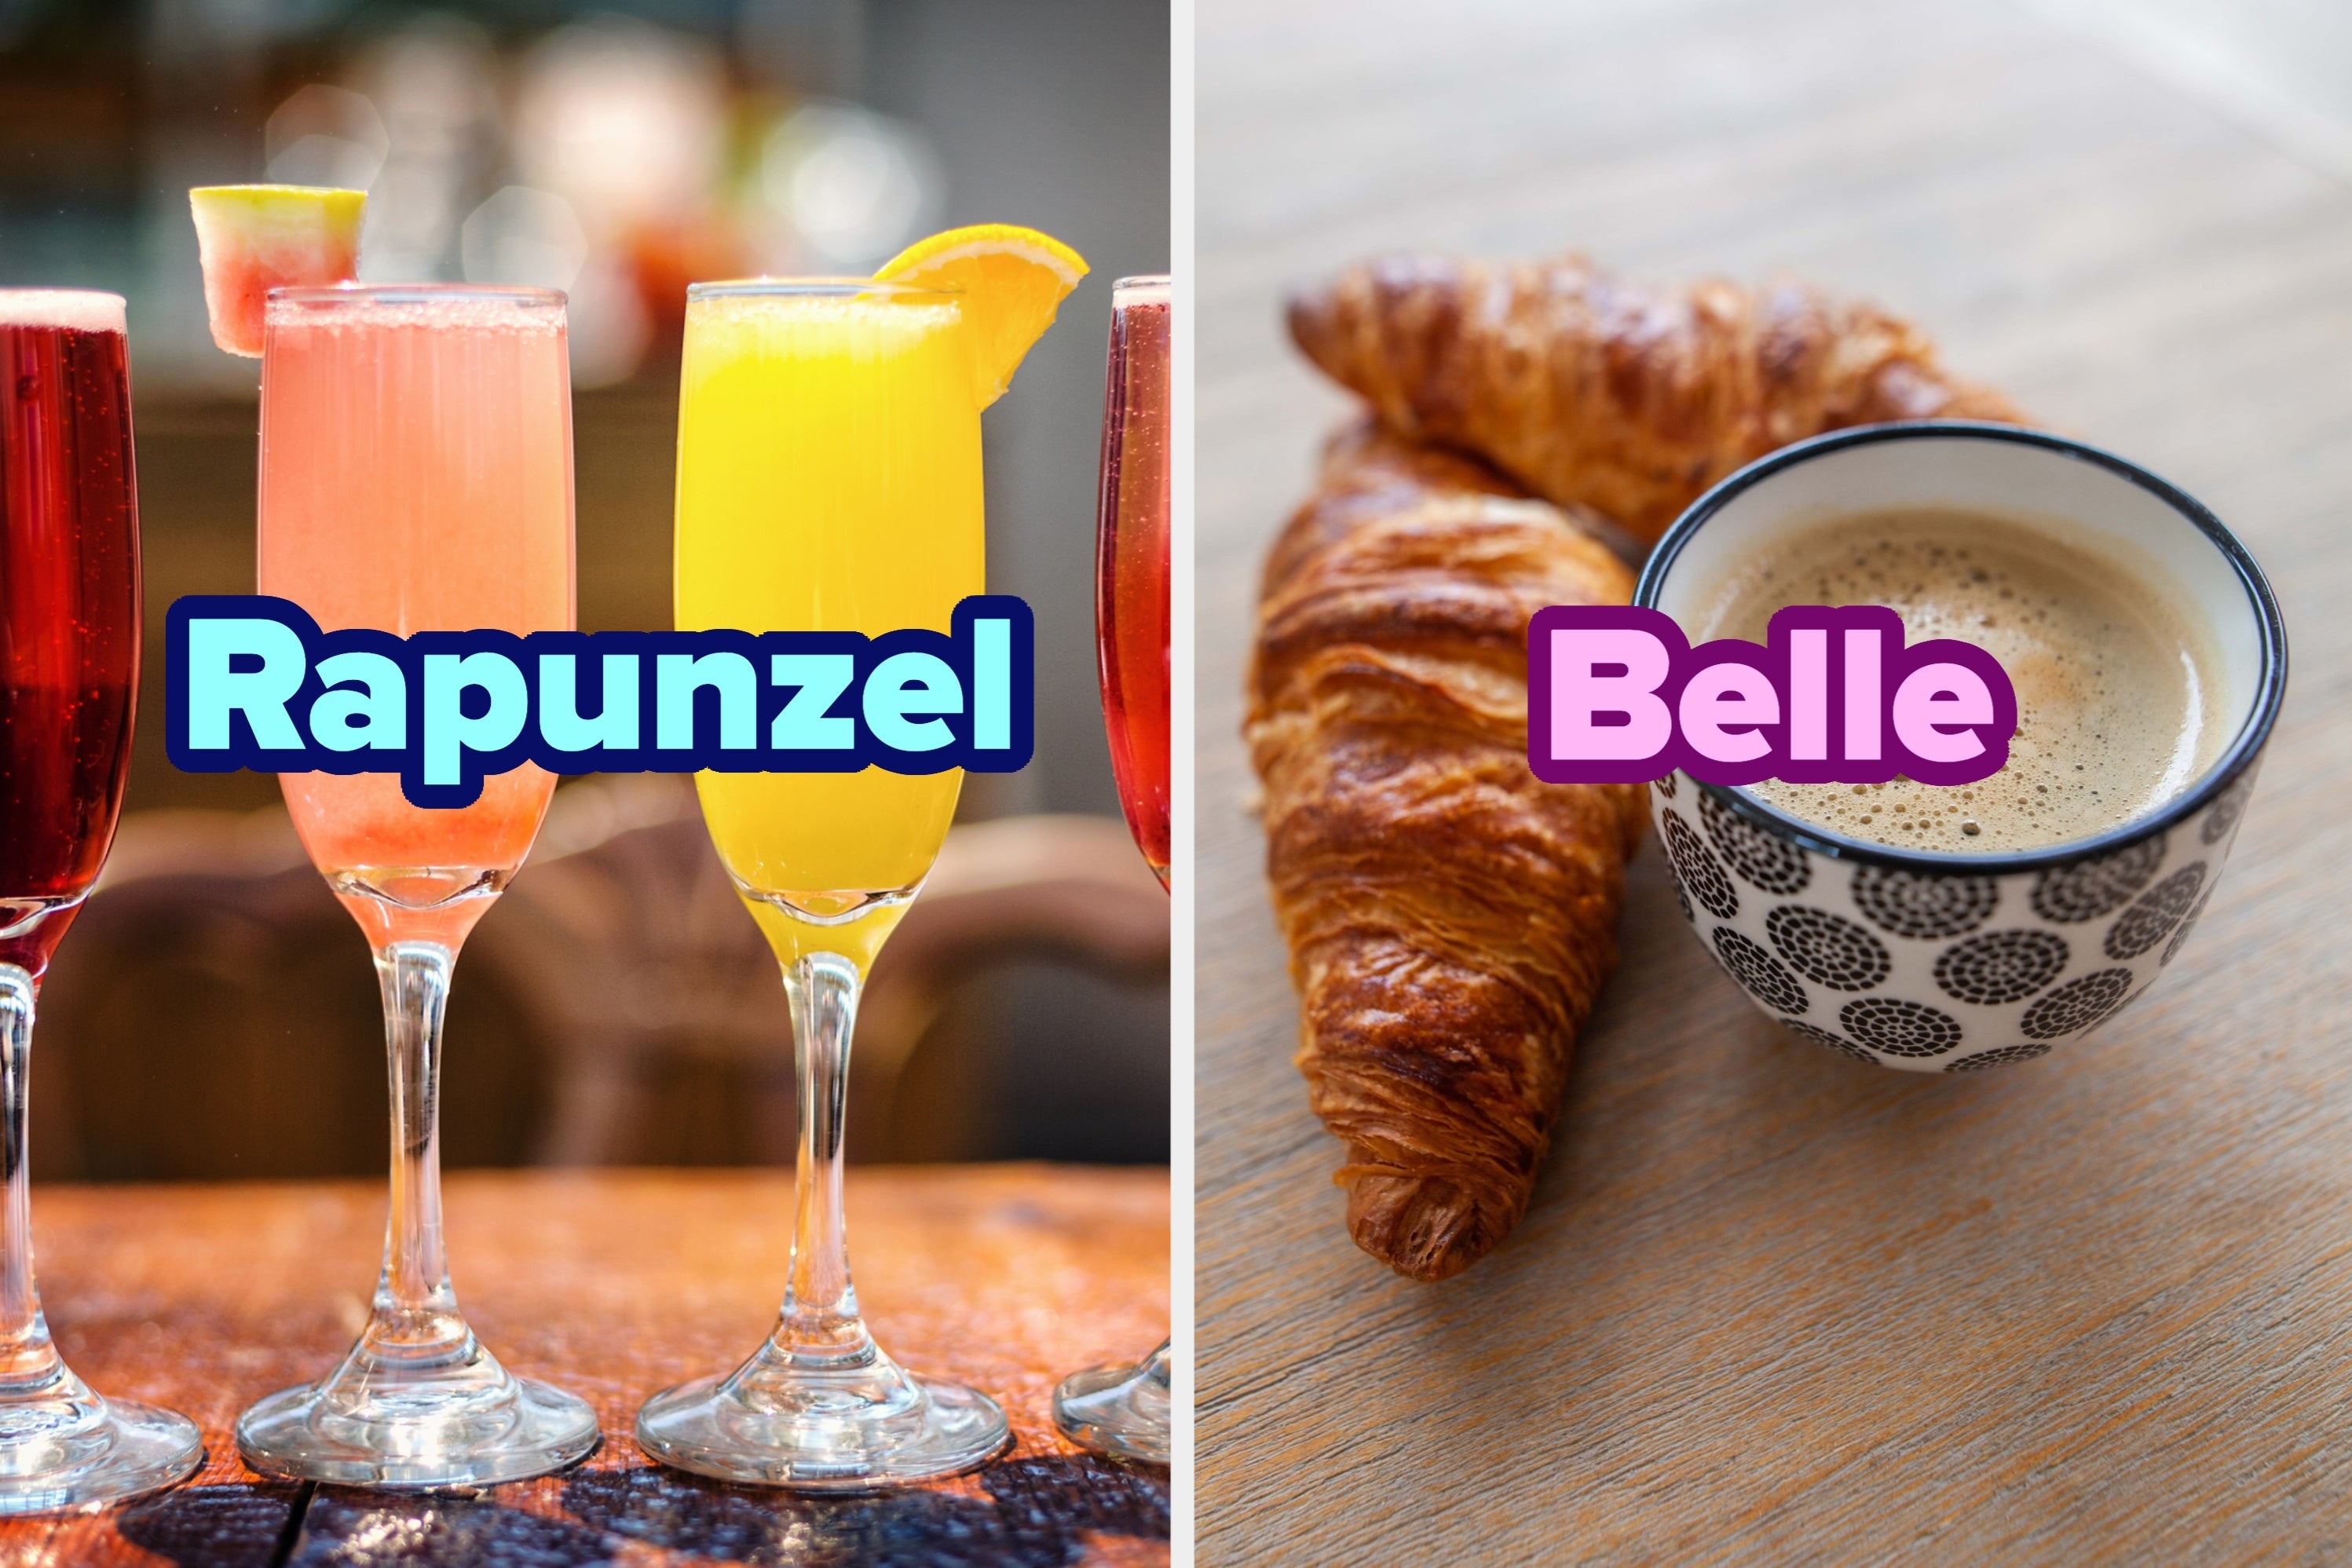 On the left, some assorted cocktails labeled Rapunzel, and on the right, some croissants next to a cup of coffee labeled Belle